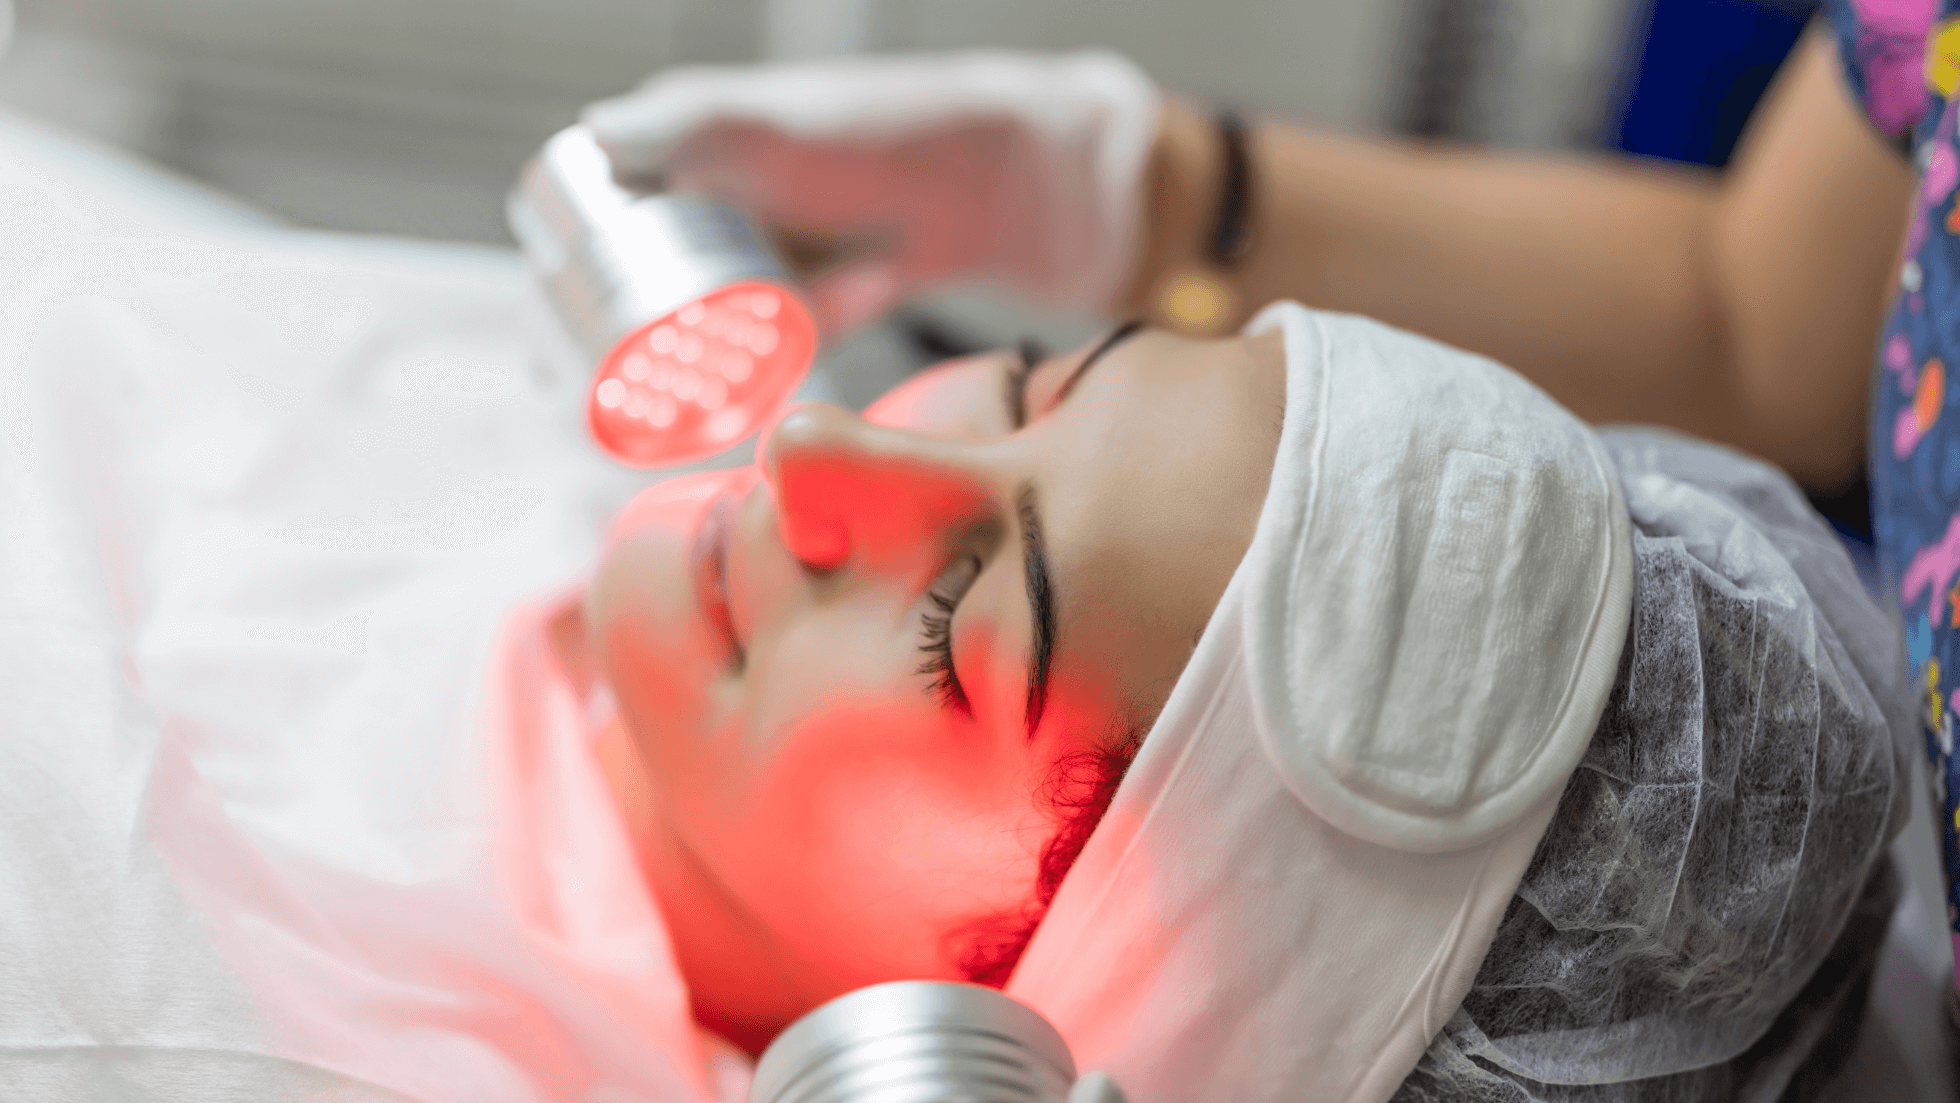 Led Light Therapy Facial The Ultimate Guide